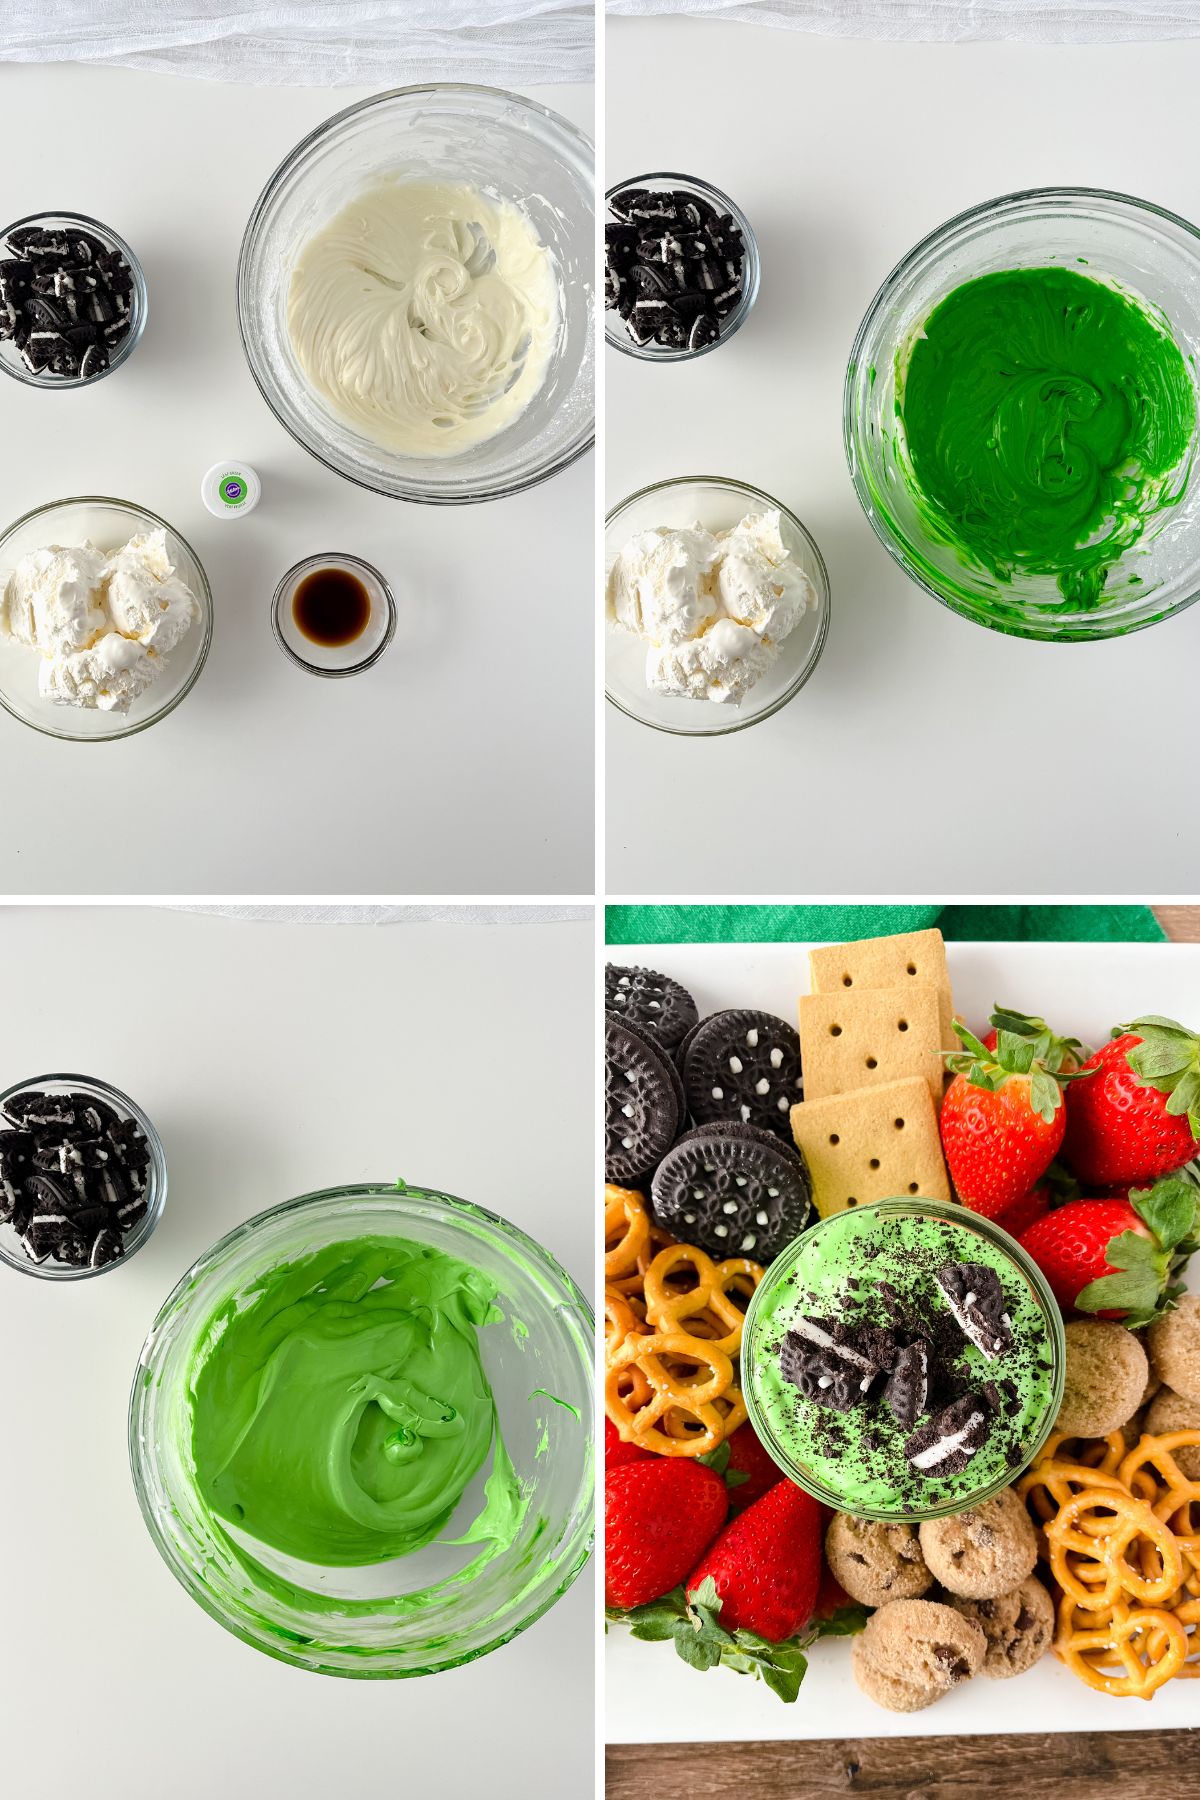 A collage of images showing how to make a St Patricks Day Dip.